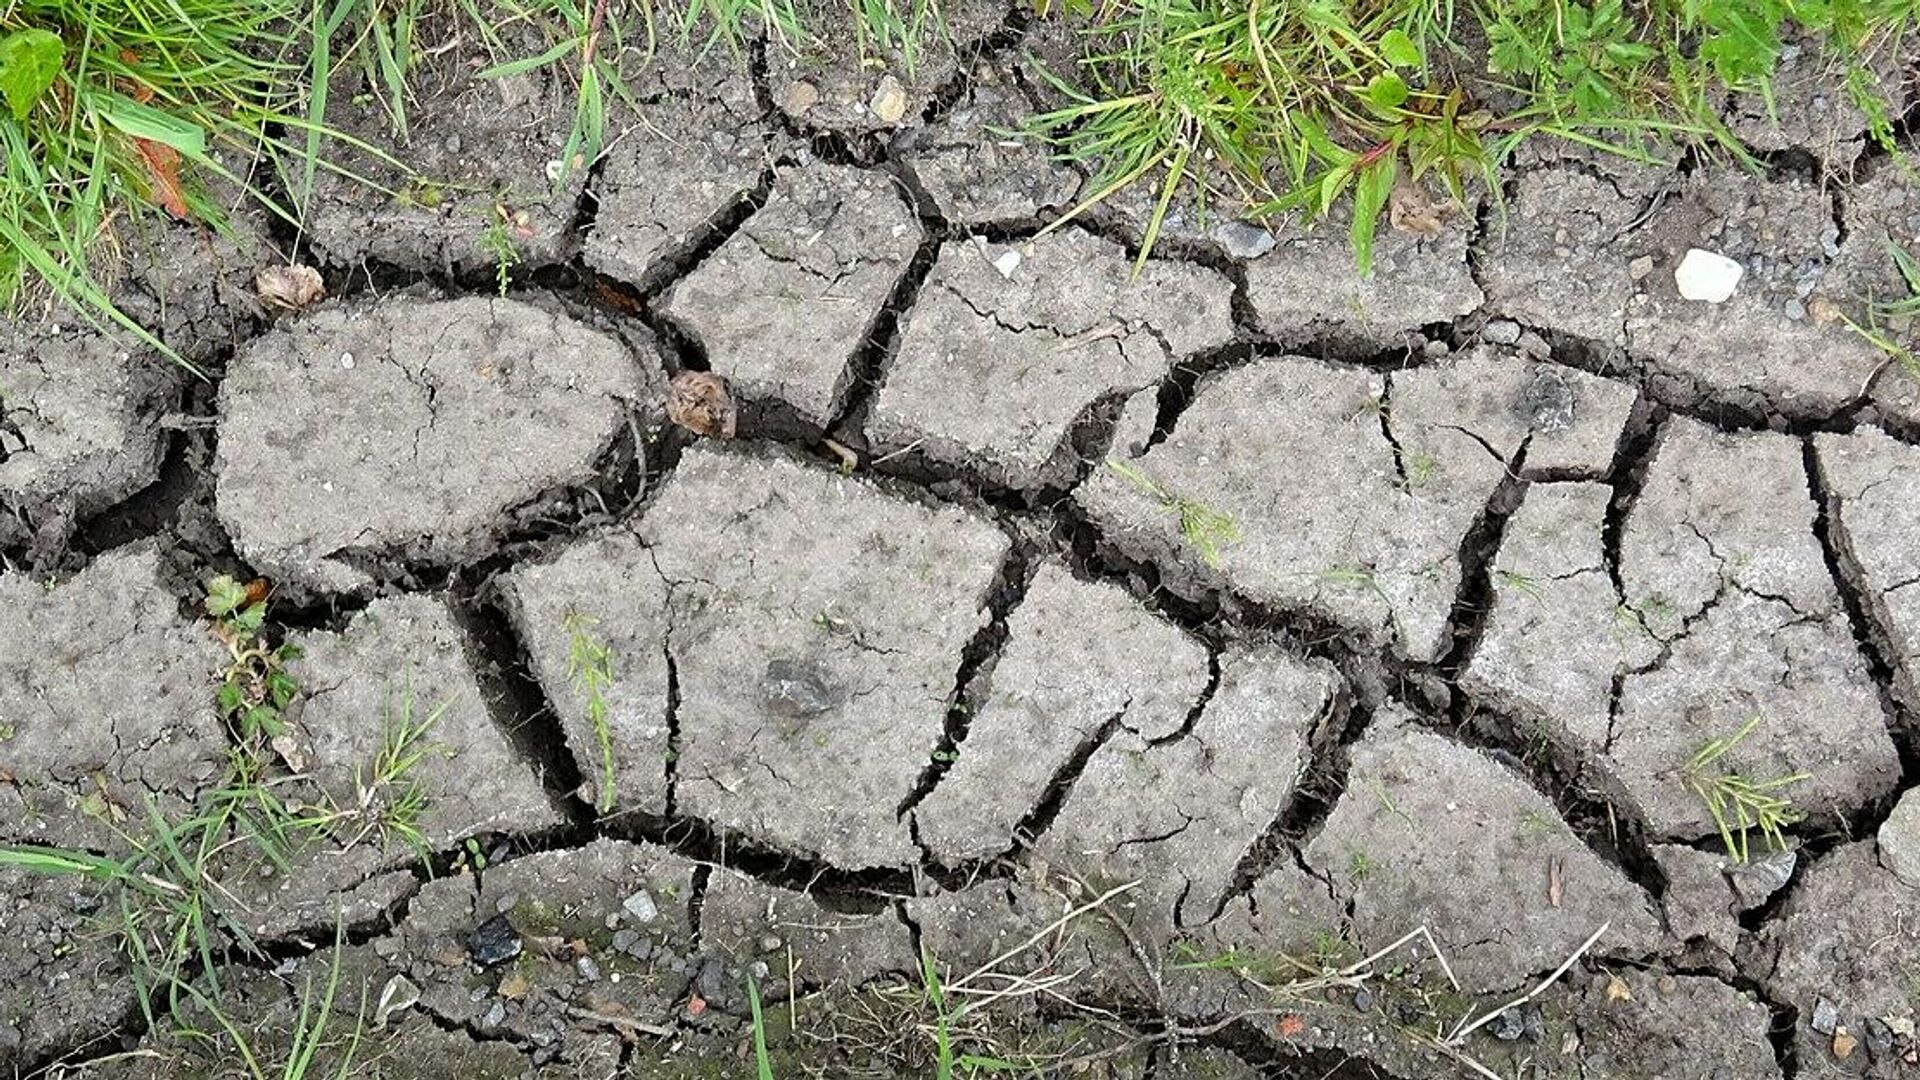 Cracked earth in a ditch after prolonged drought. 2020. Kilmaurs parish - Sputnik International, 1920, 23.02.2022